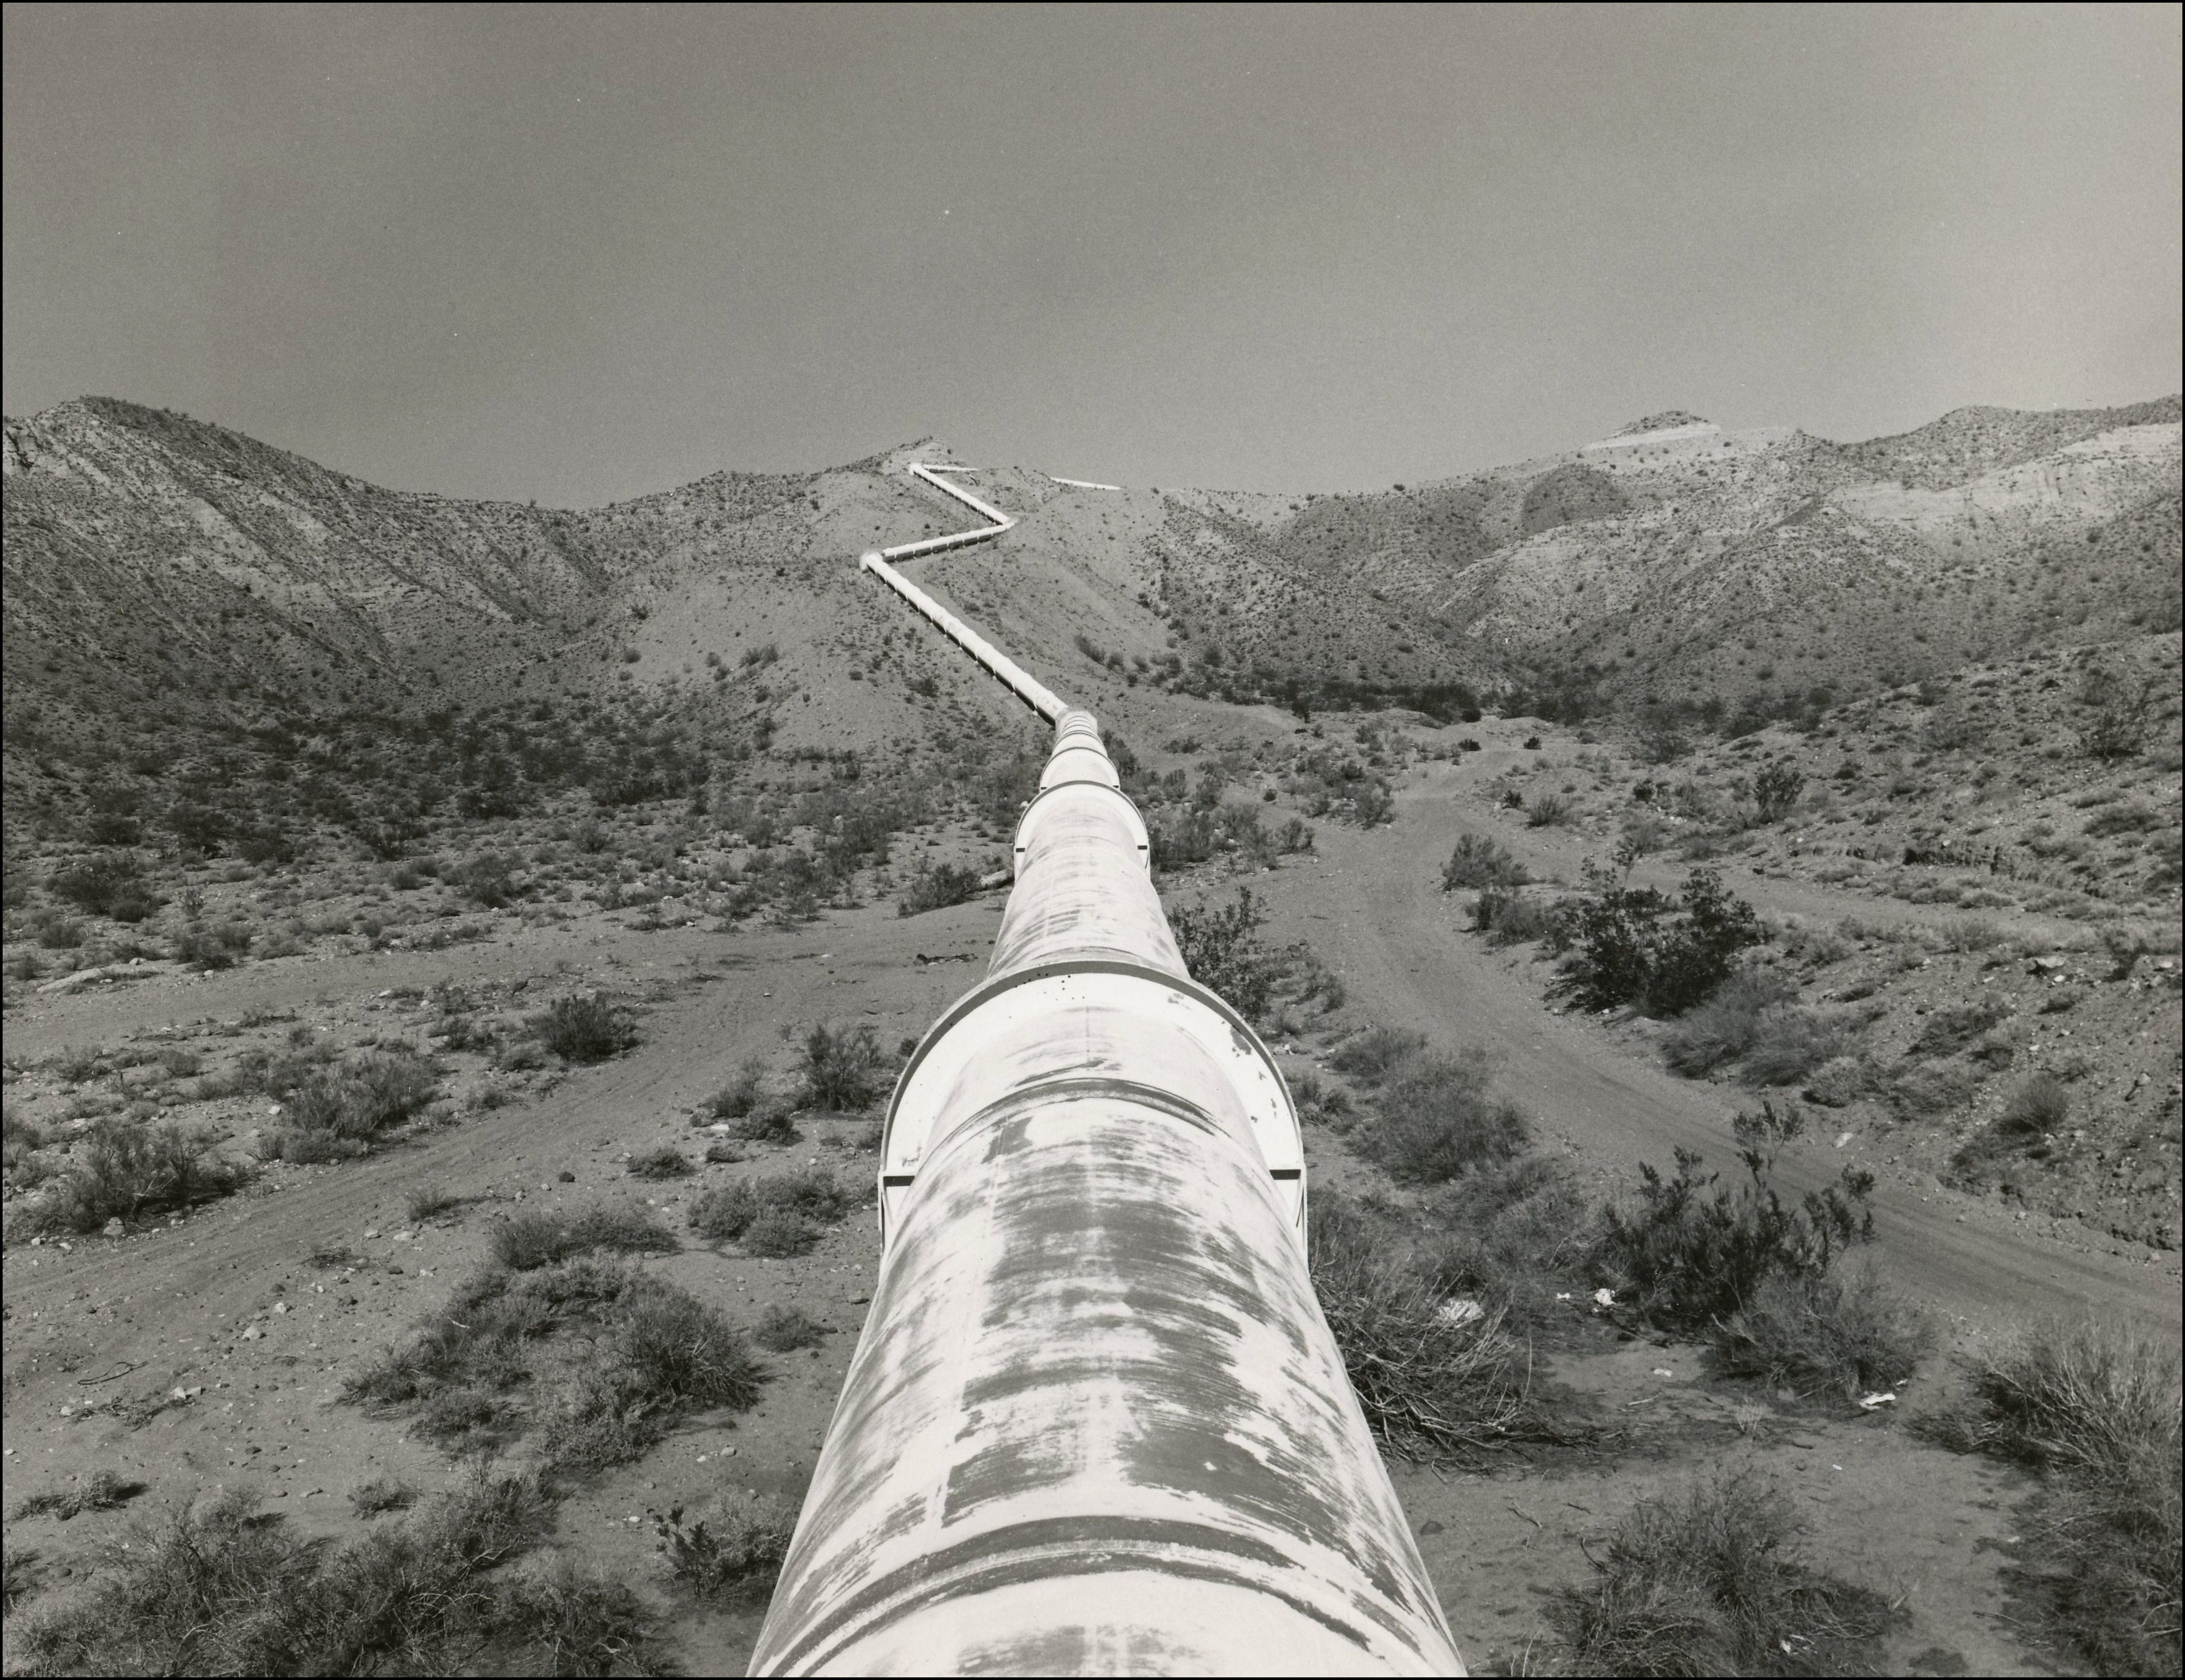 Looking down a large pipeline going through the desert and up over a hill